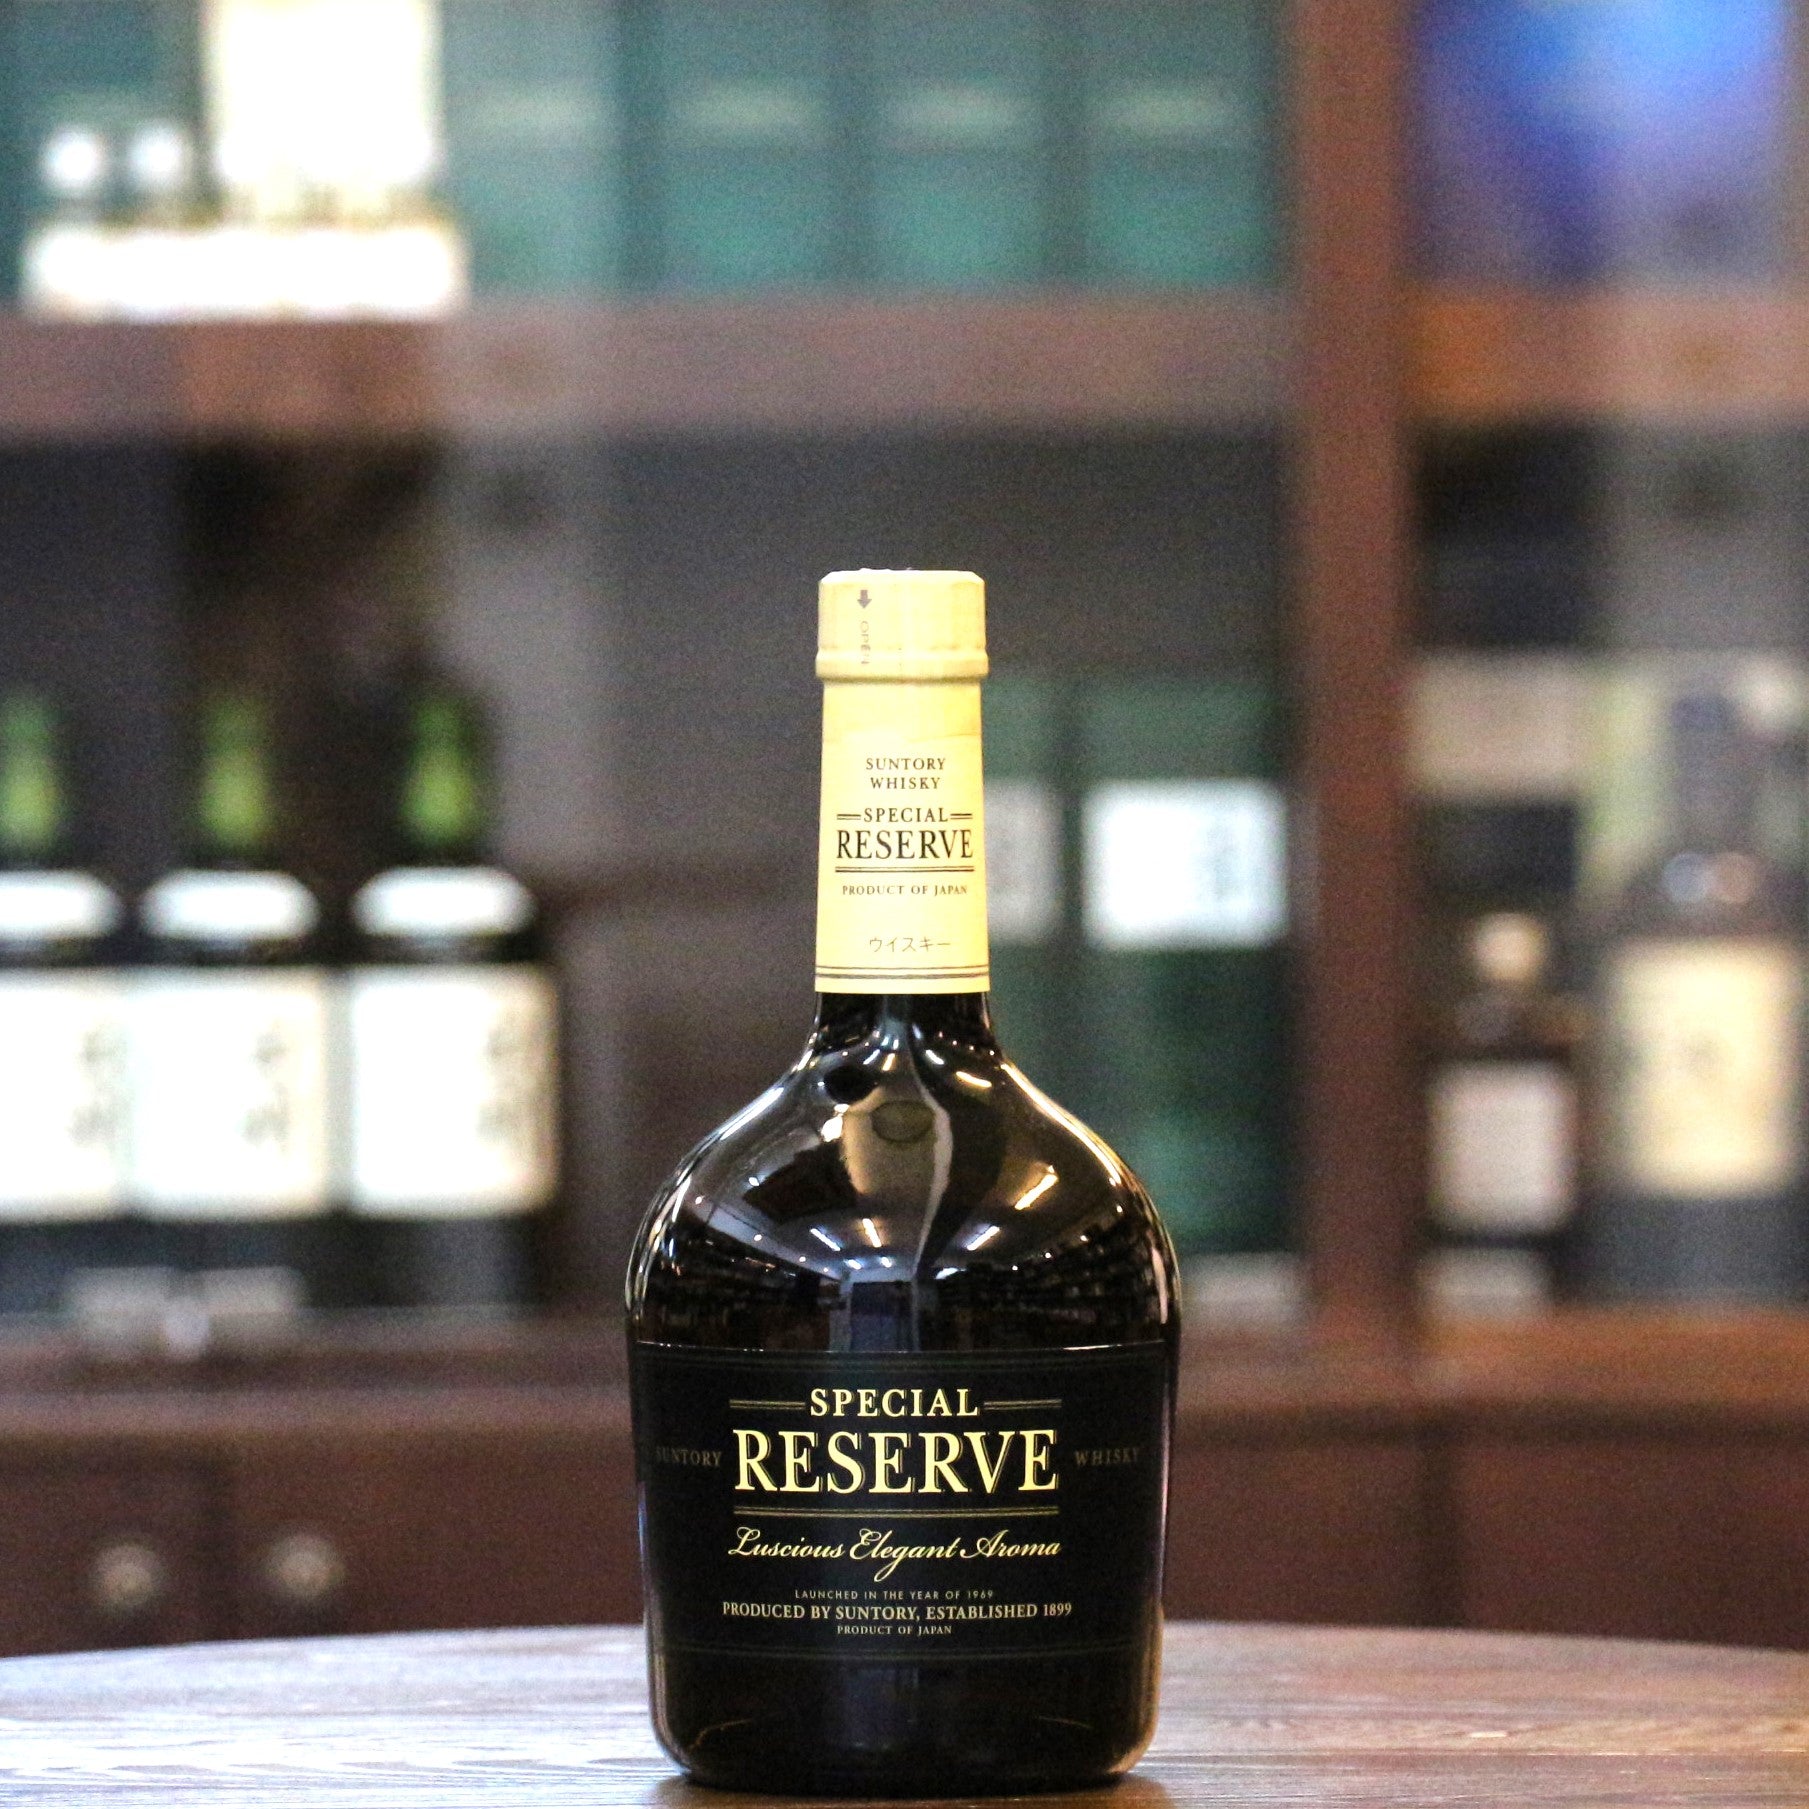 This Special Reserve launched in 70th anniversary of Suntory. This Whisky is blended by the malt and grain that from Yamazaki and Hakushu